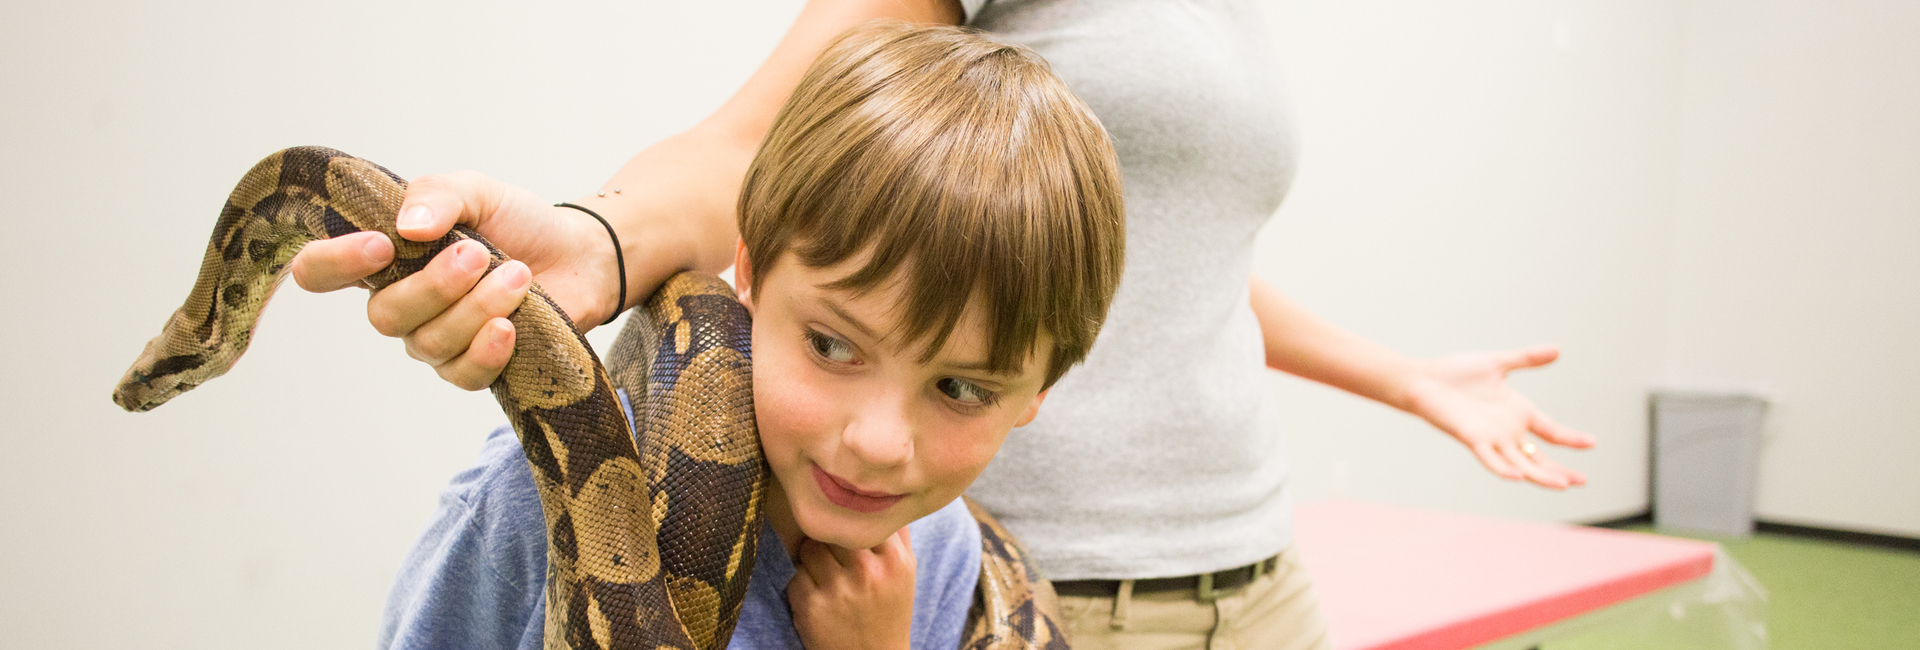 A boa constrictor was just one of a wide variety of animals that kids got to meet through the MavKids camp